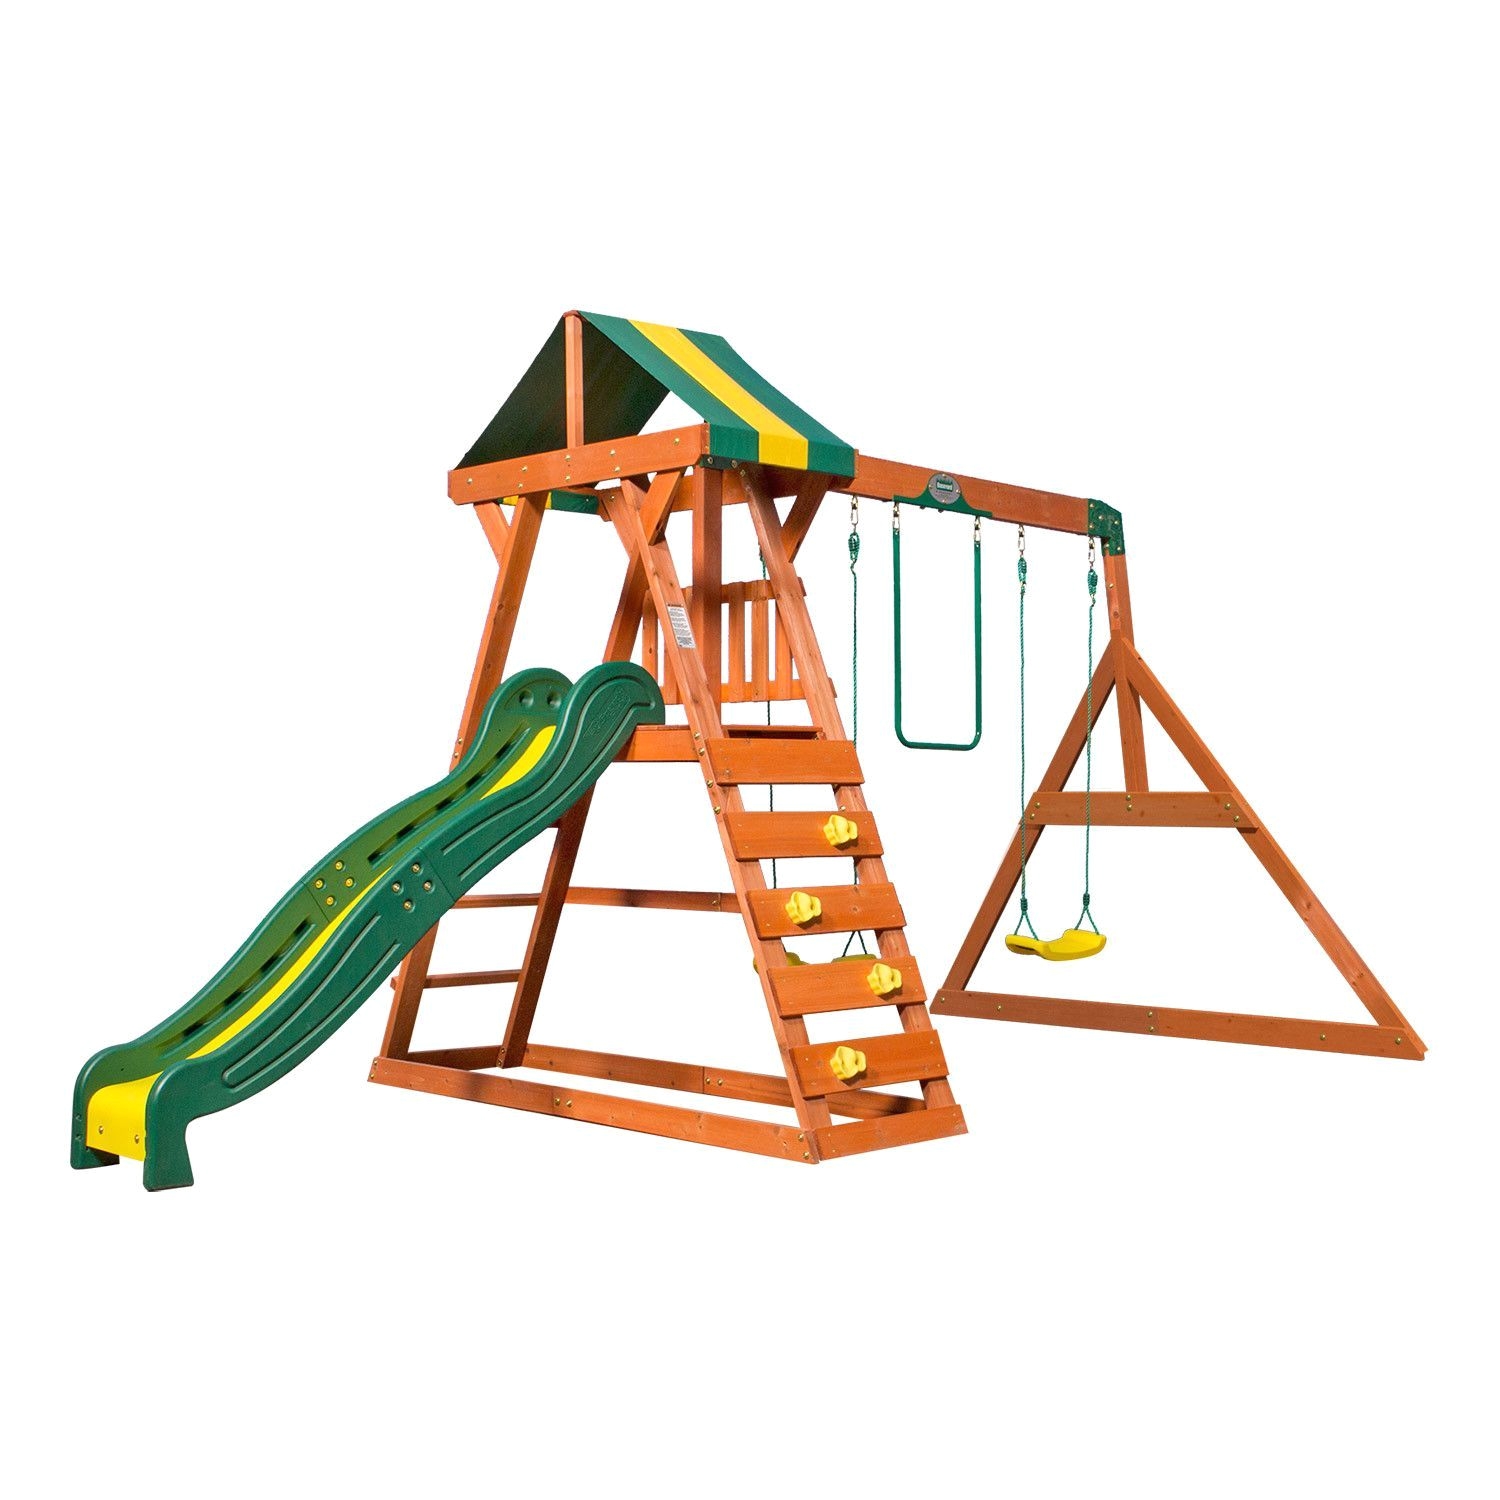 the madison is a one of a kind swing set with a sturdy 45 h deck which includes a 2 piece protective side rail and a stylish green and yellow tarp roof